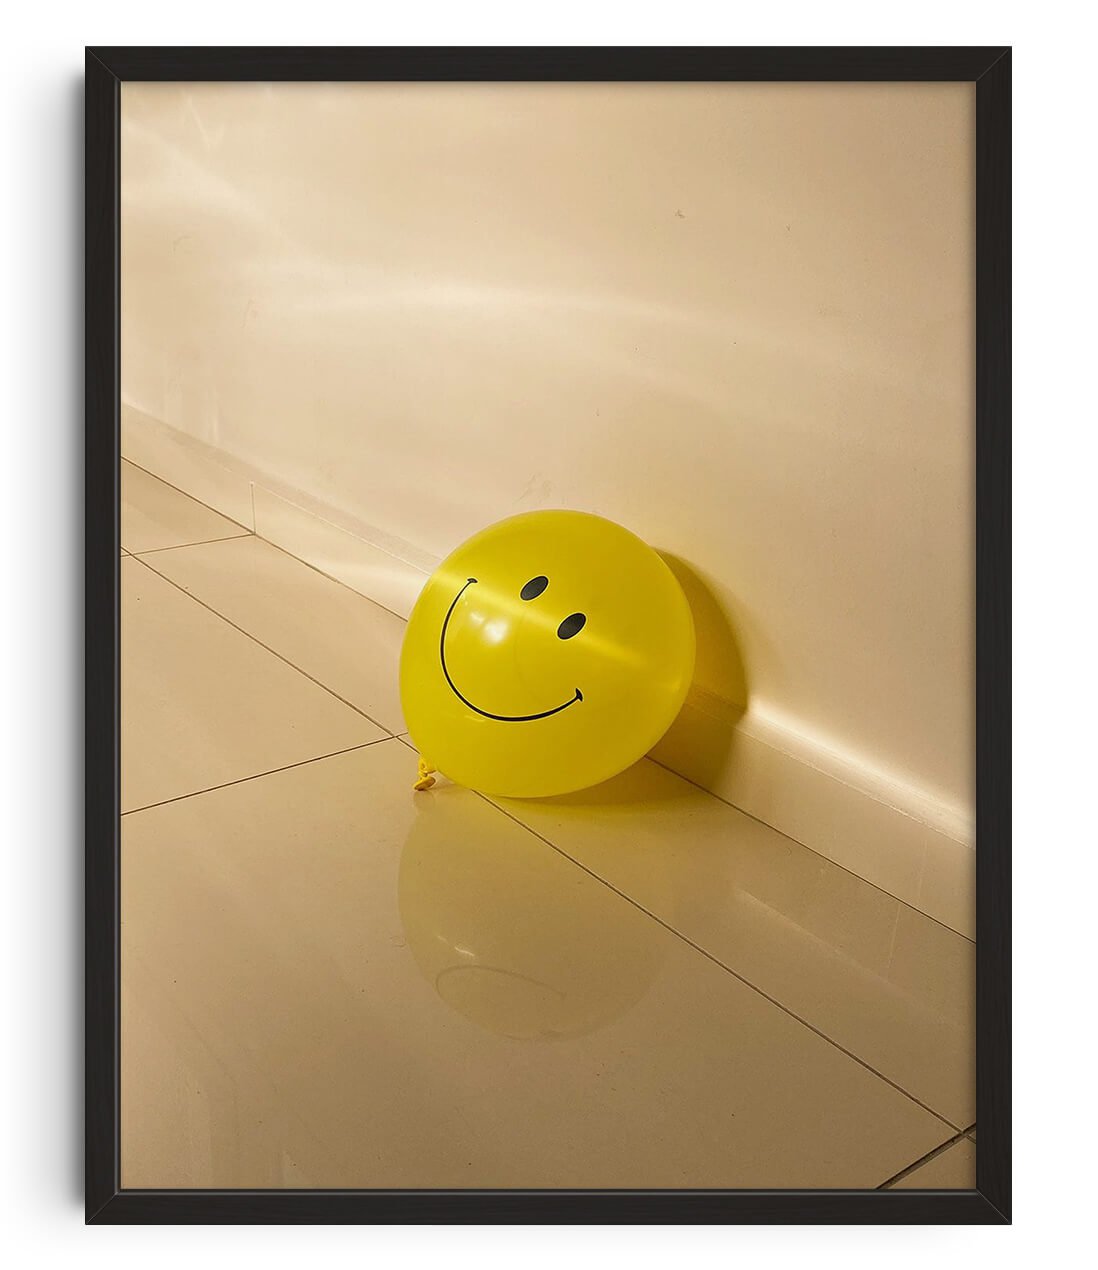 Smiley contemporary wall art print by Burak Boylu - sold by DROOL